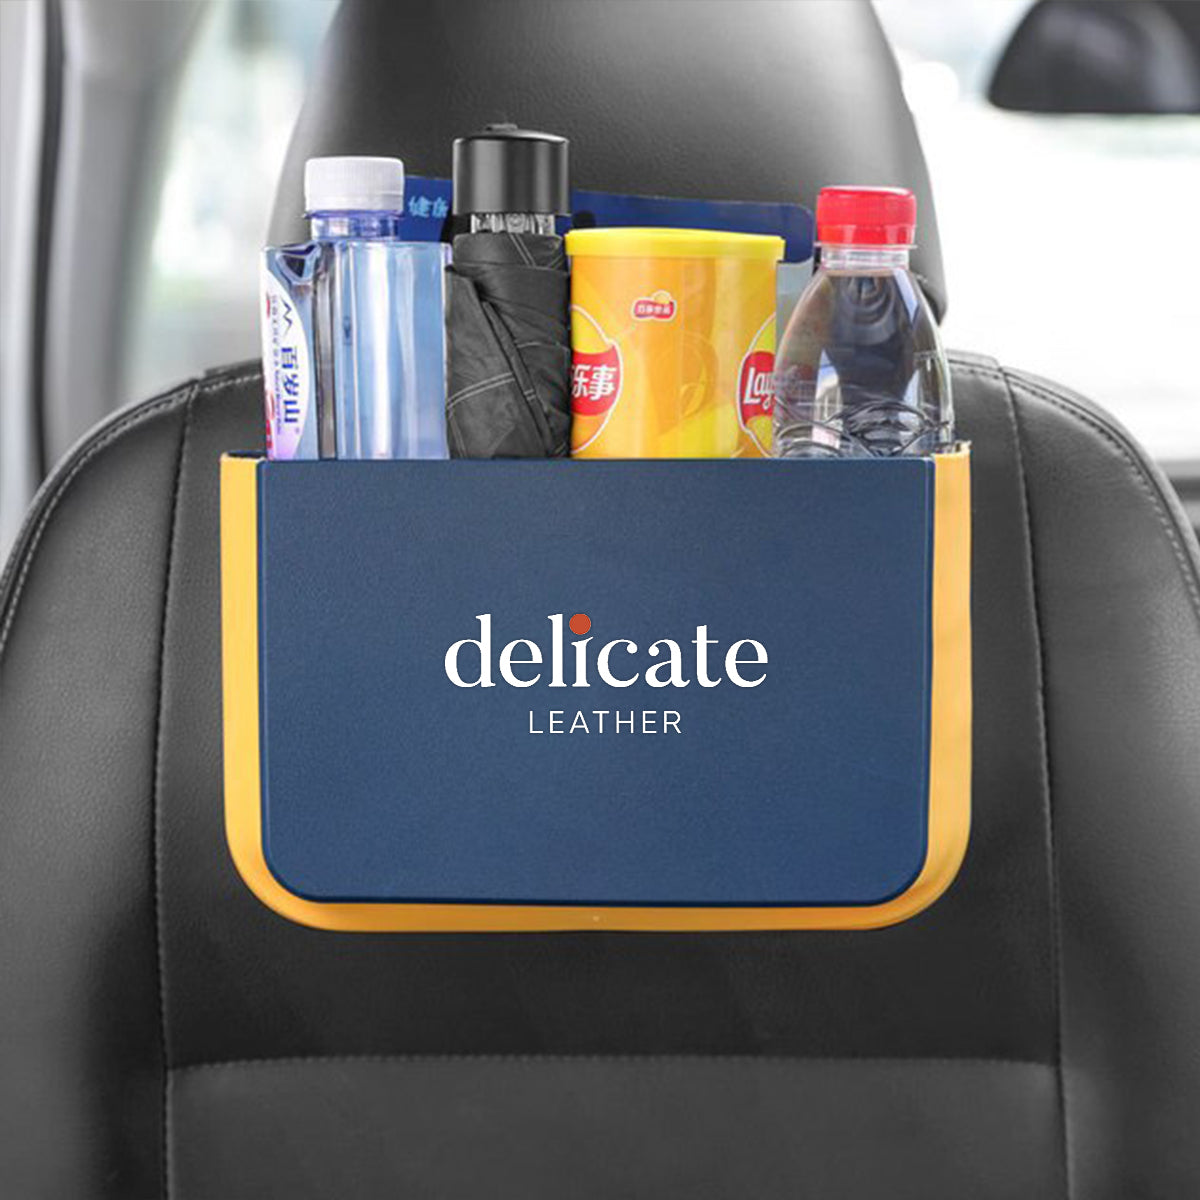 Delicate Leather Hanging Waterproof Car Trash can-Foldable, Custom For Your Cars, Waterproof, and Equipped with Cup Holders and Trays. Multi-Purpose, Car Accessories PF11992 - Delicate Leather